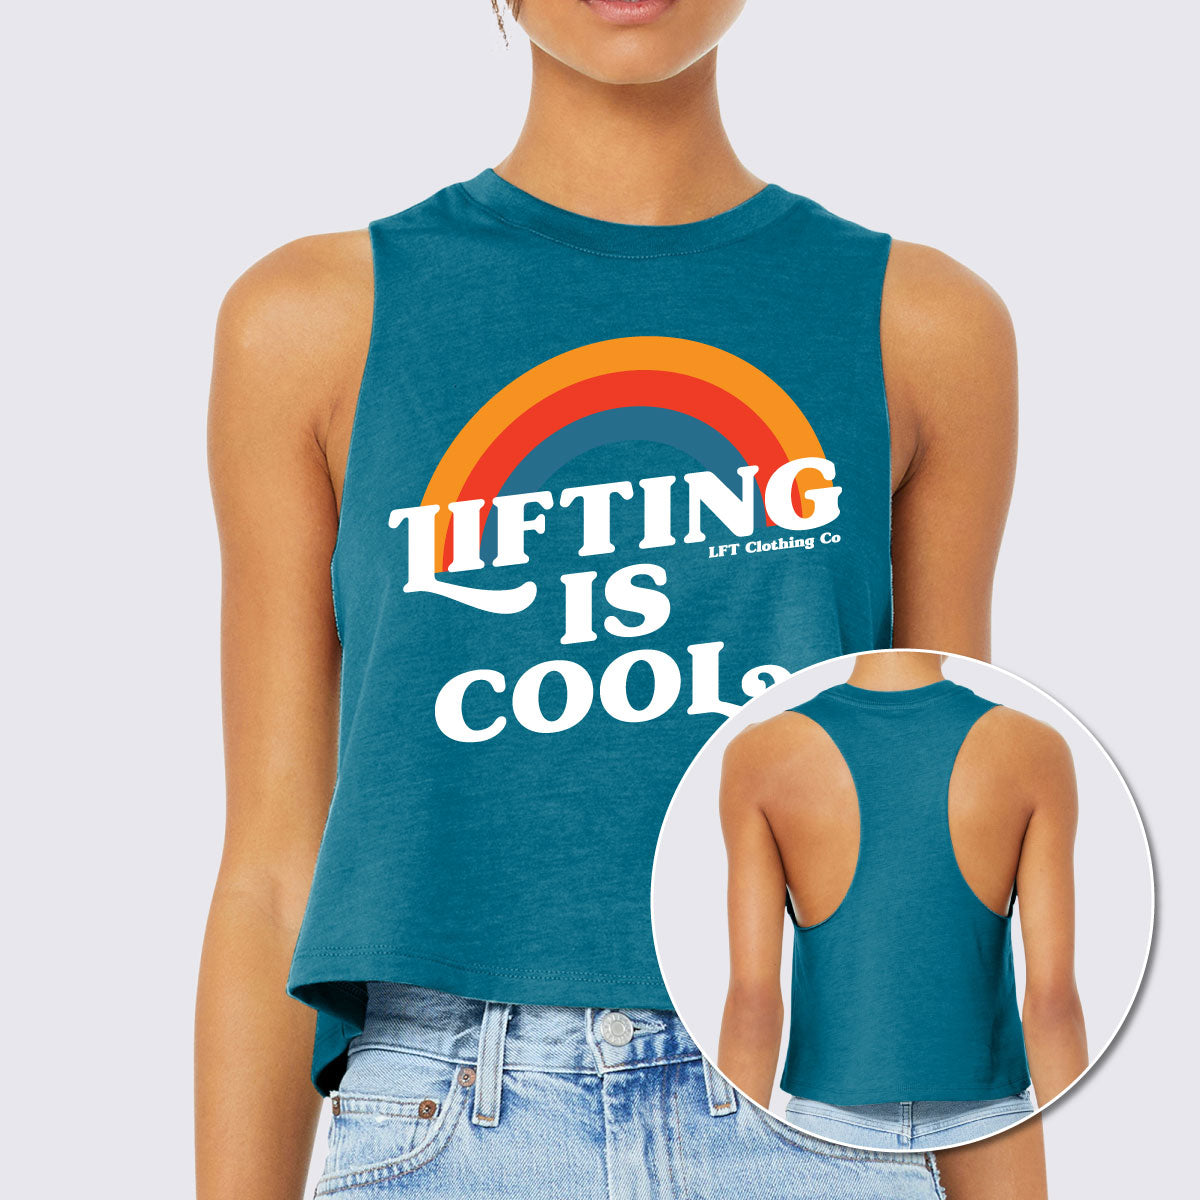 Lifting is Cool Racerback Crop Tank - The LFT Clothing Company